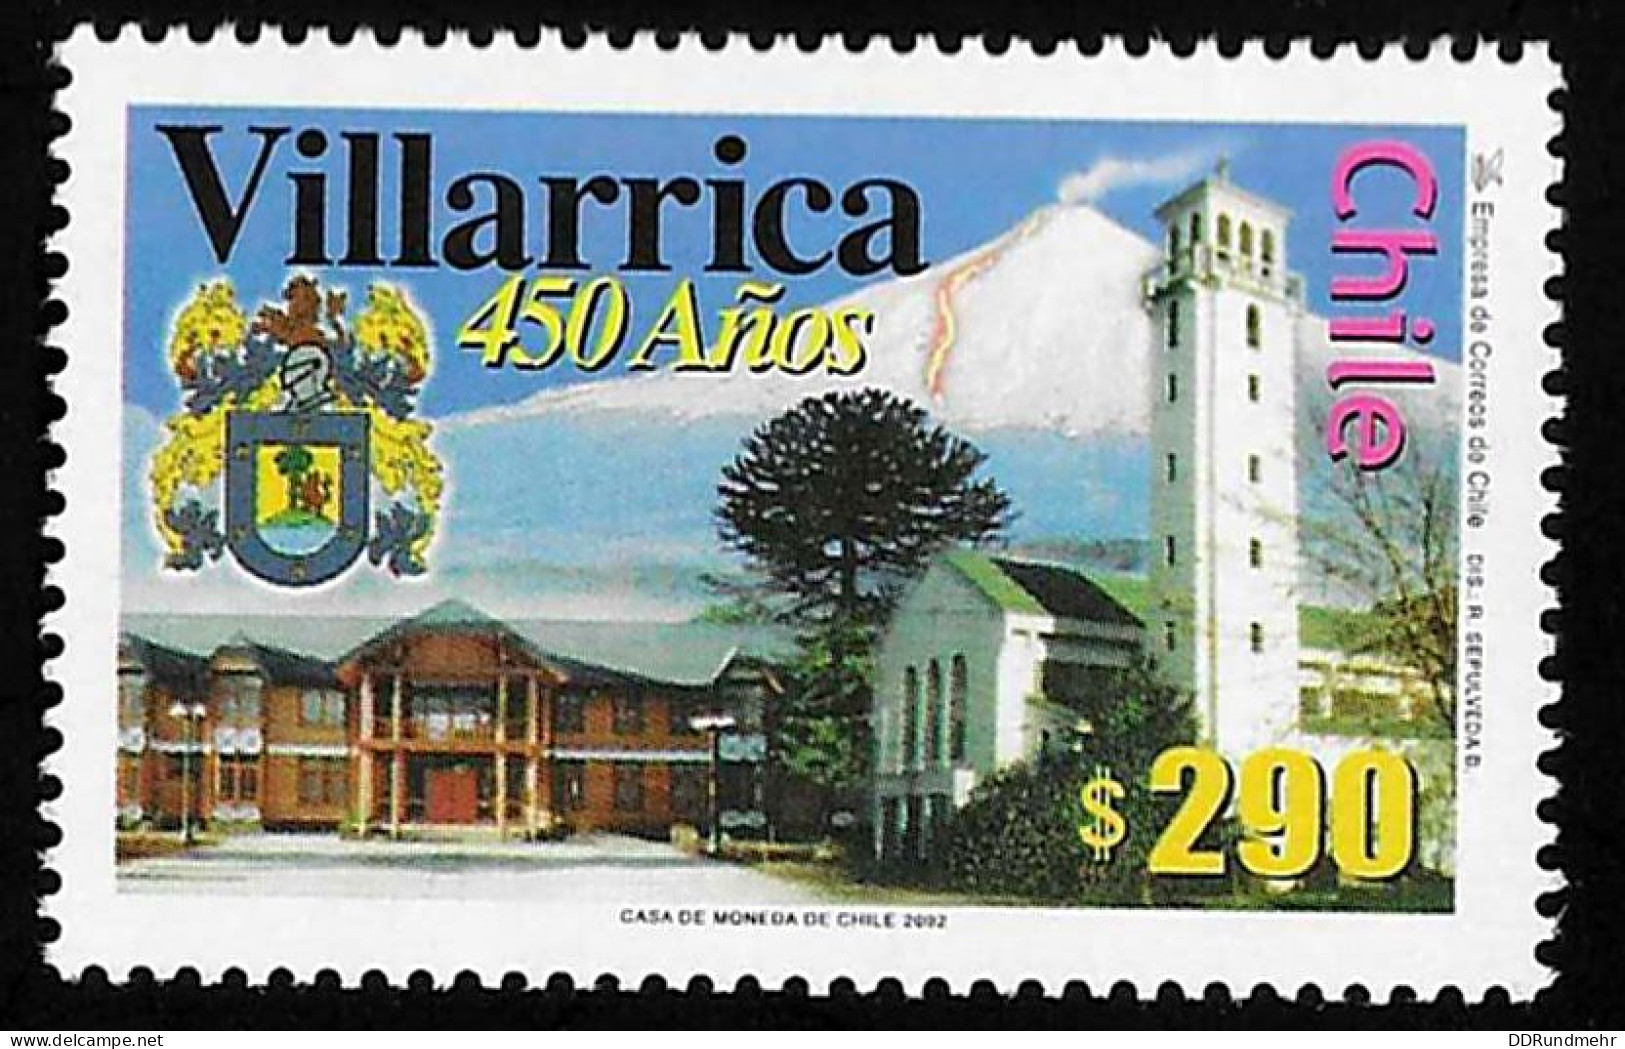 2002 Villarrica  Michel CL 2065 Stamp Number CL 1390 Yvert Et Tellier CL 1632 Stanley Gibbons CL 2042 Xx MNH - Chile